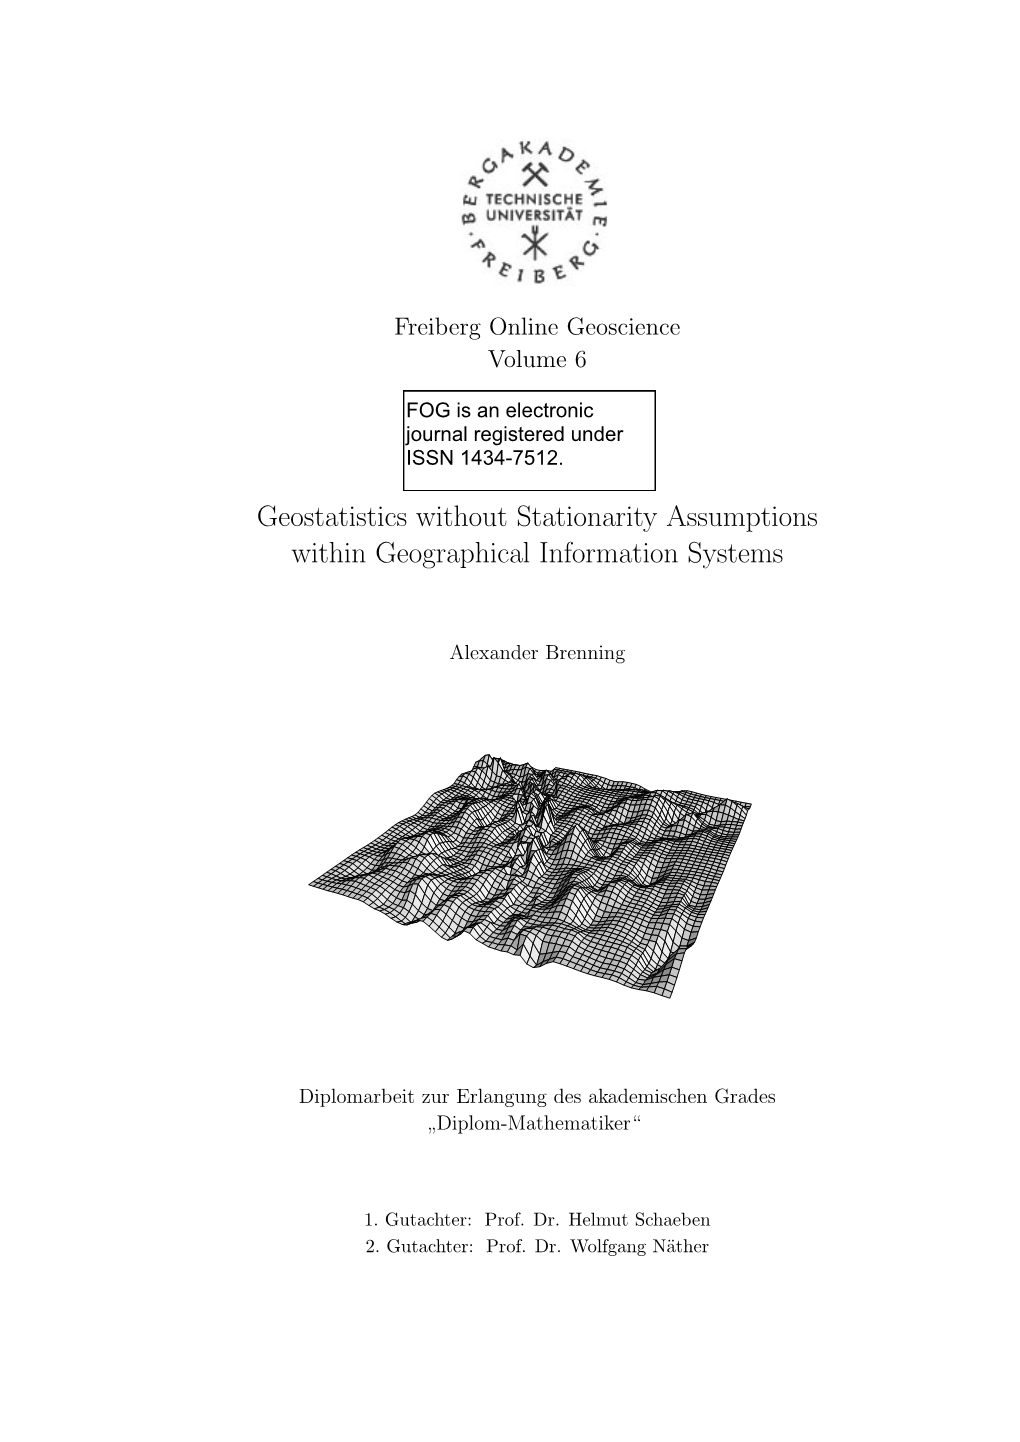 Geostatistics Without Stationarity Assumptions Within Geographical Information Systems